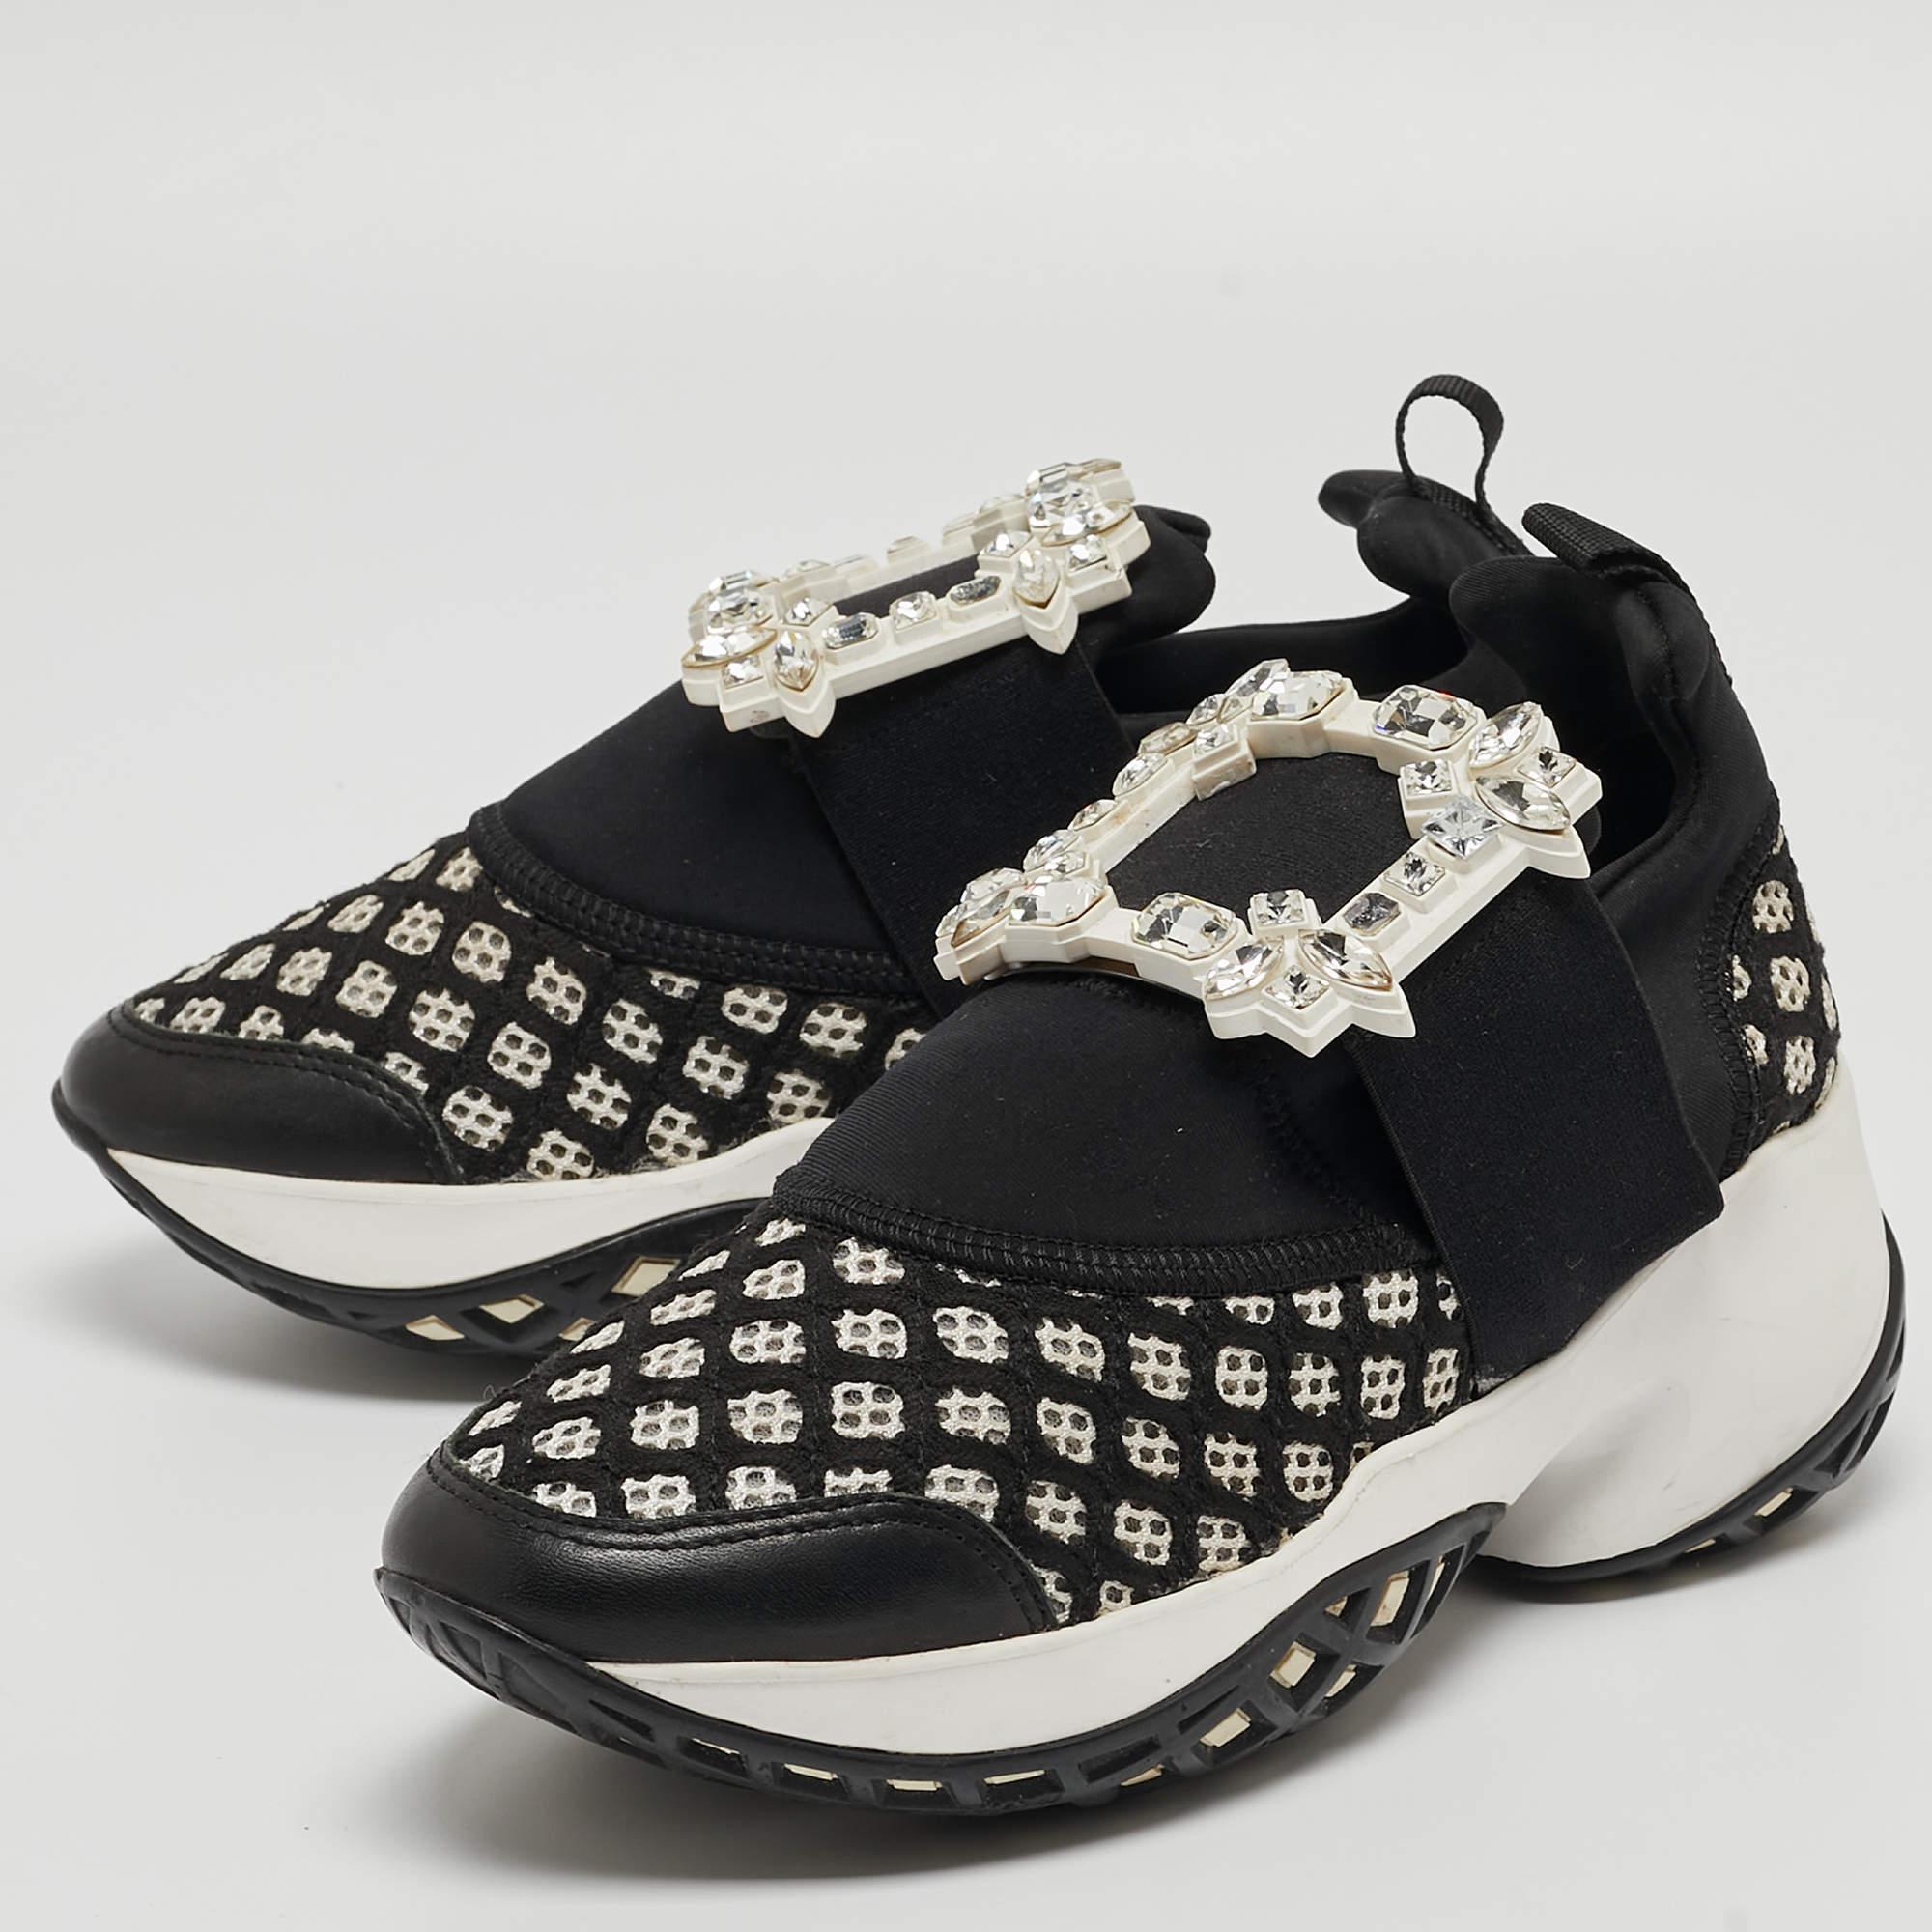 Look your stylish best every time you step out wearing these Sneaky Viv sneakers from the House of Roger Vivier. They are made from mesh and neoprene on the exterior with a crystal-embellished motif perched on their vamps. They are made in a slip-on